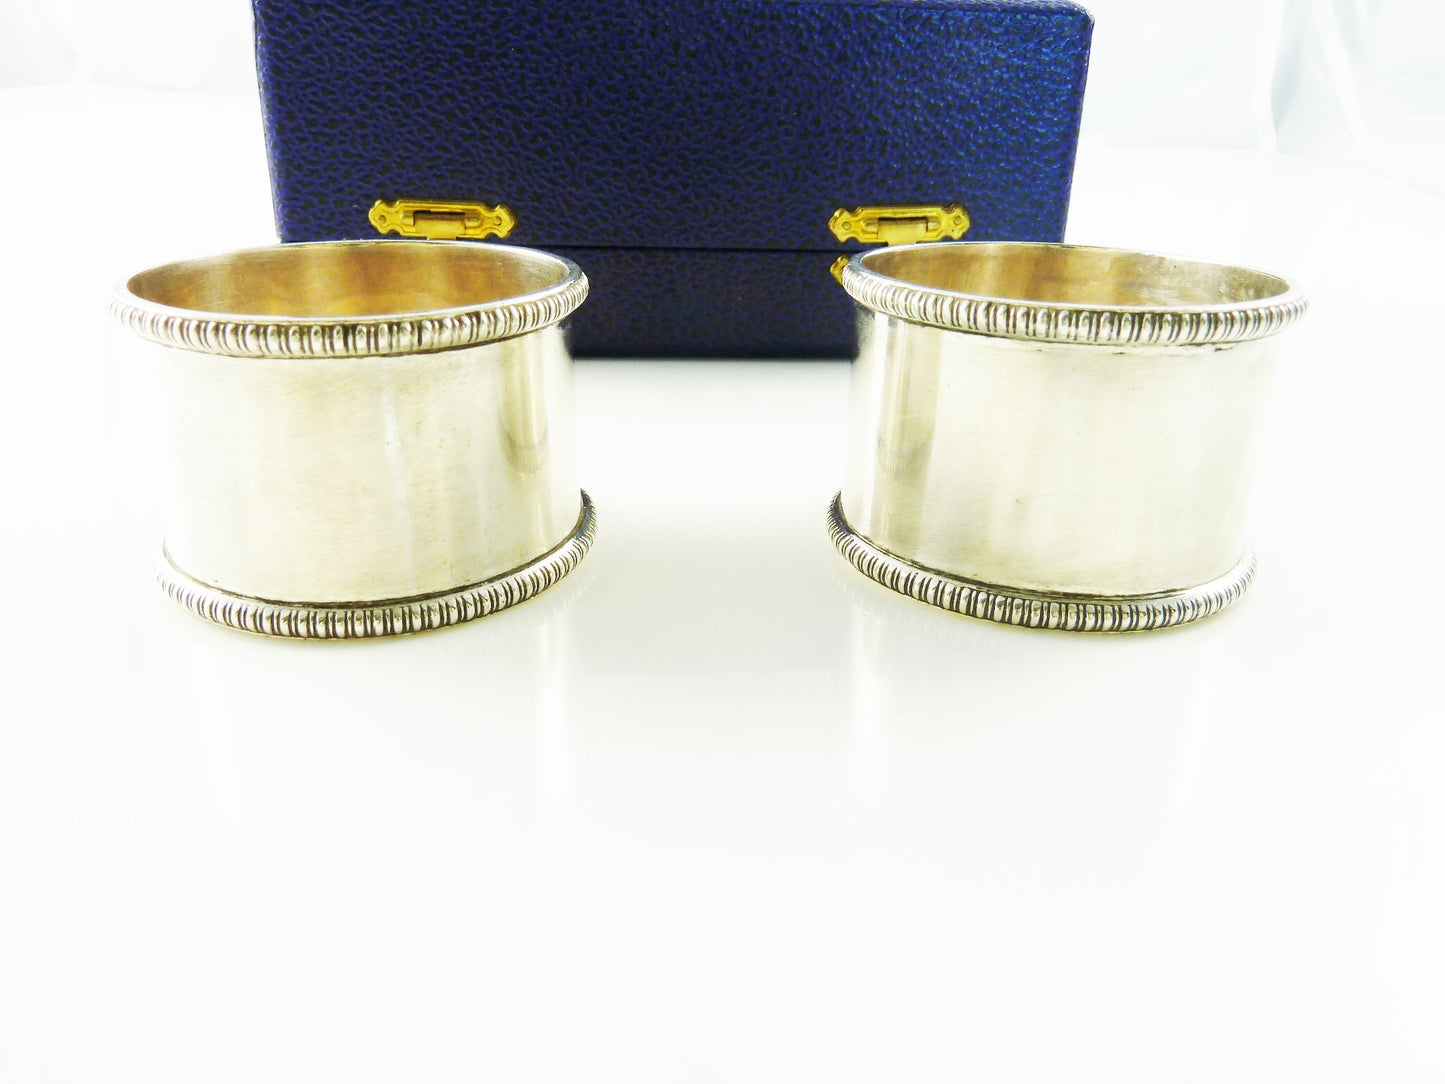 Antique English Sterling Silver Napkin Rings Pair with Gadroon Border Boxed Set - 43 Chesapeake Court Antiques